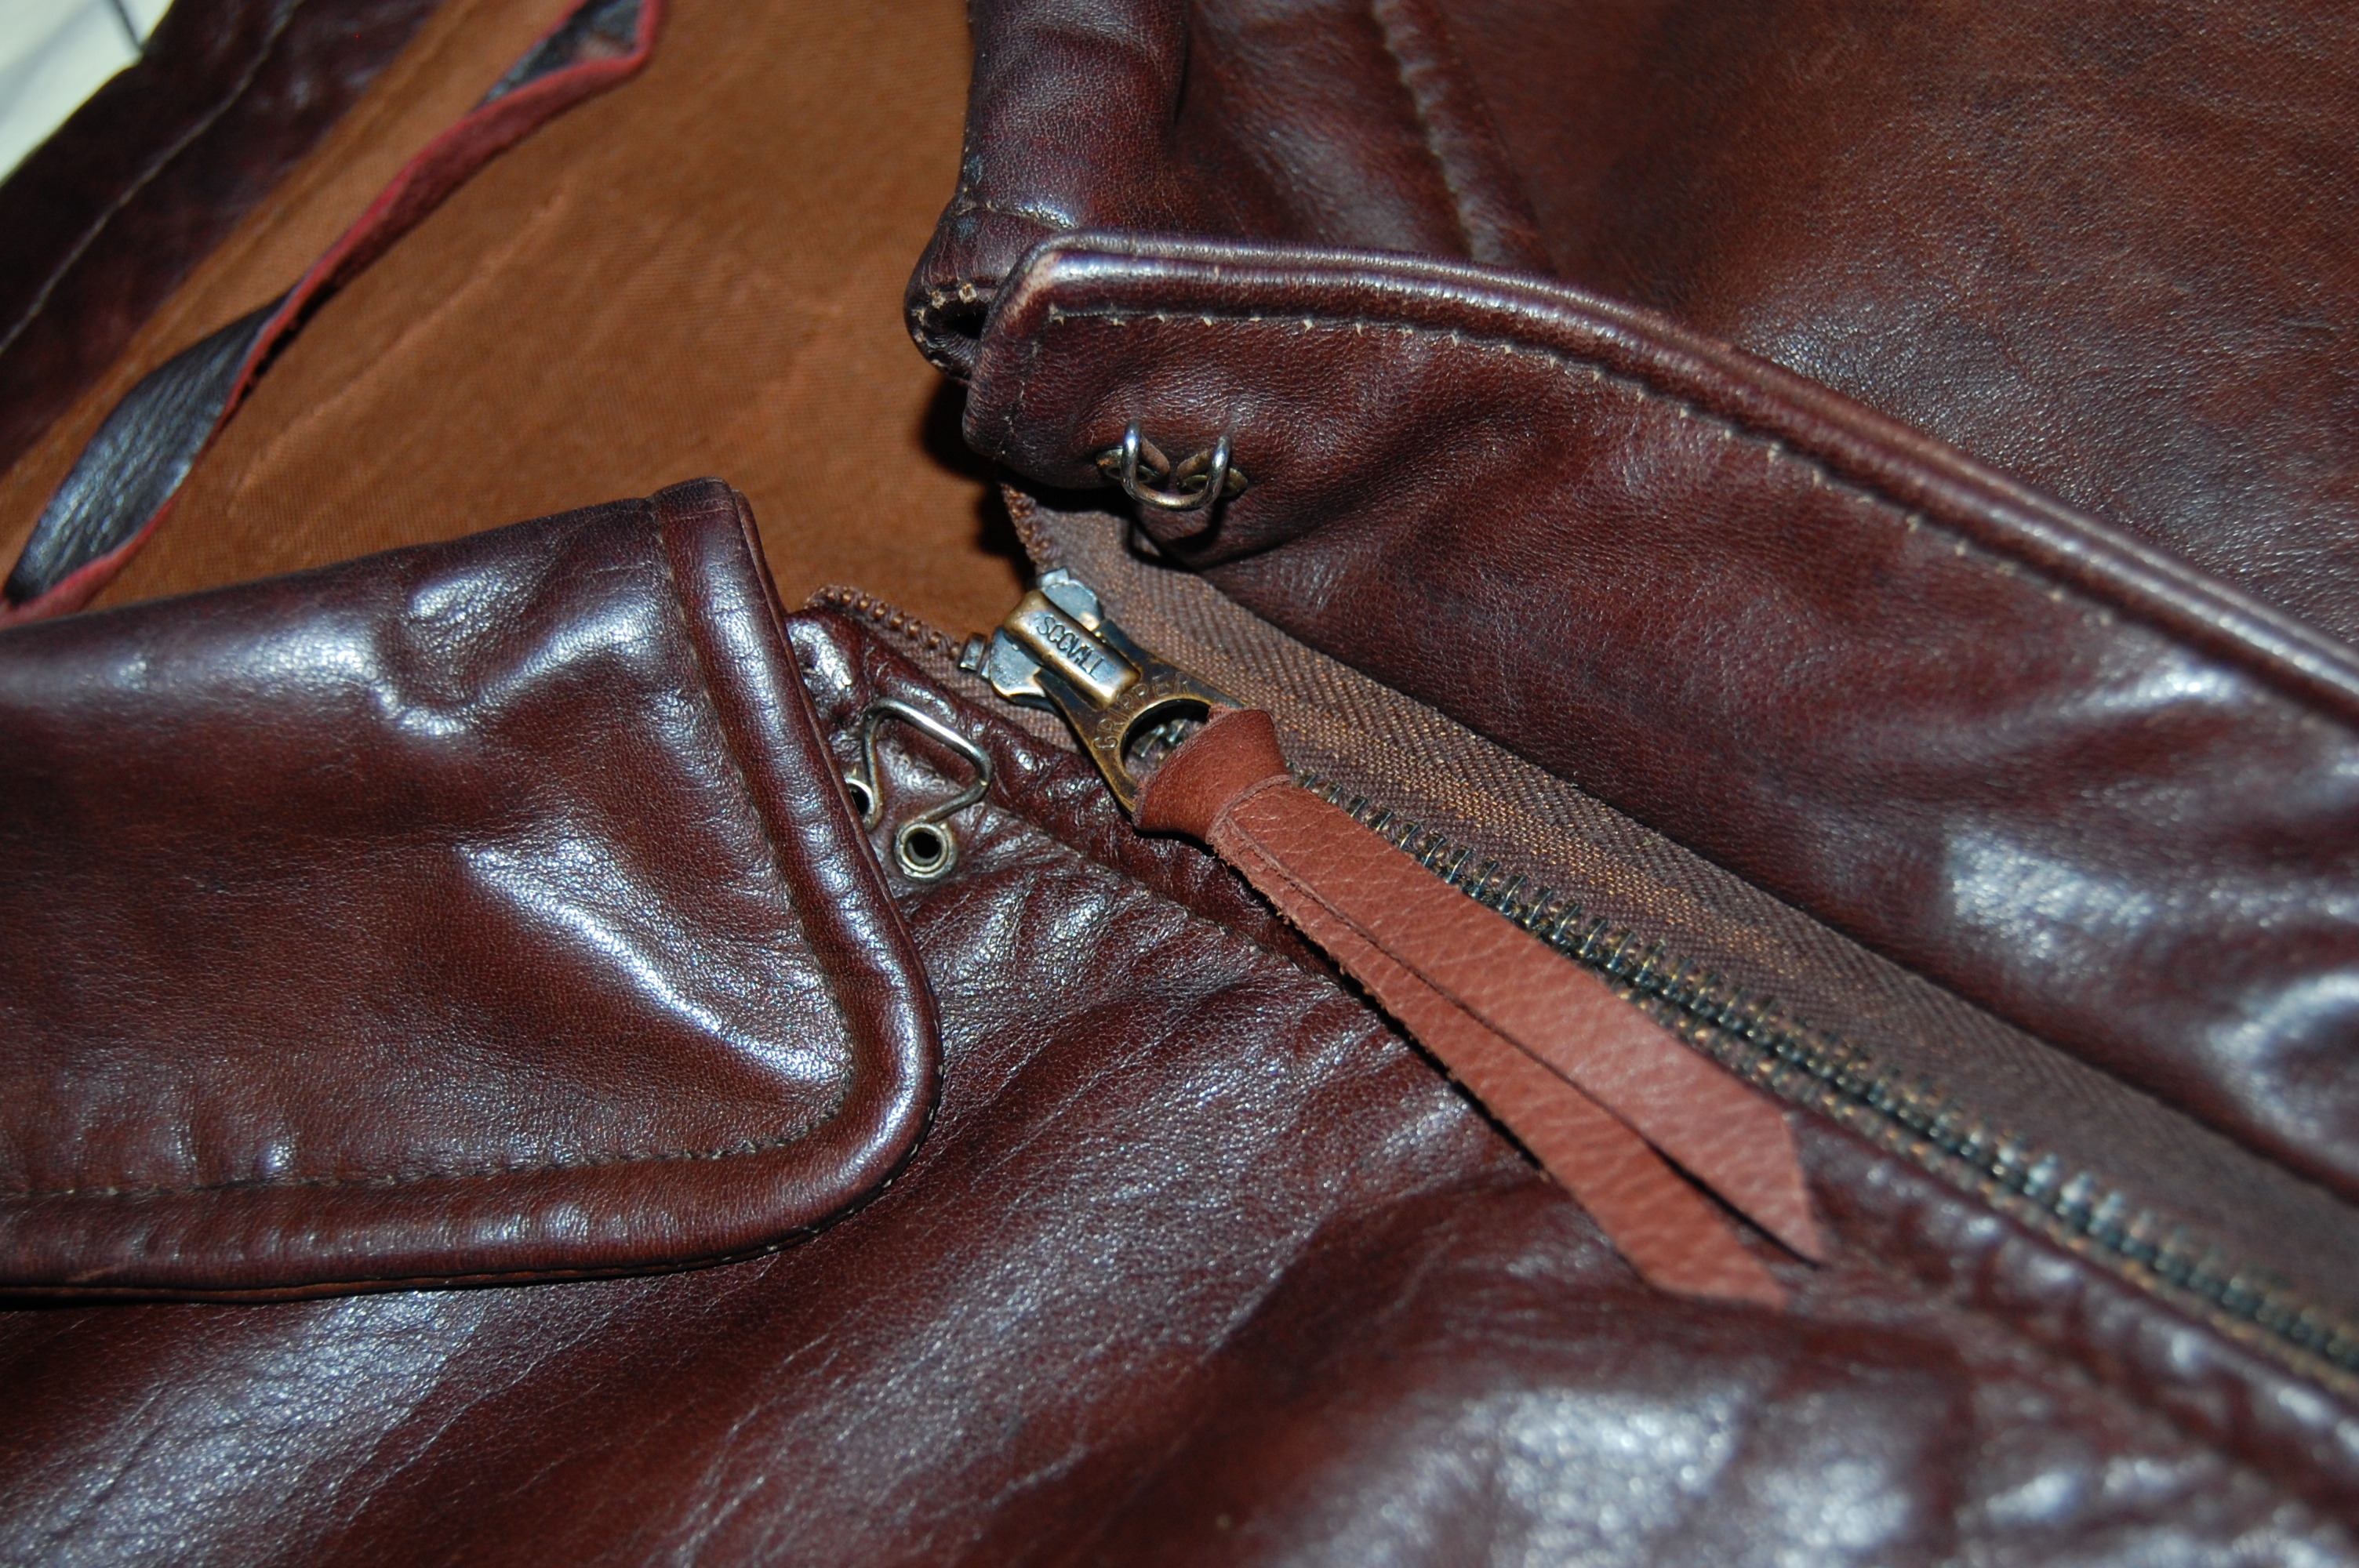 Identification of the A-2 jacket | Vintage Leather Jackets Forum